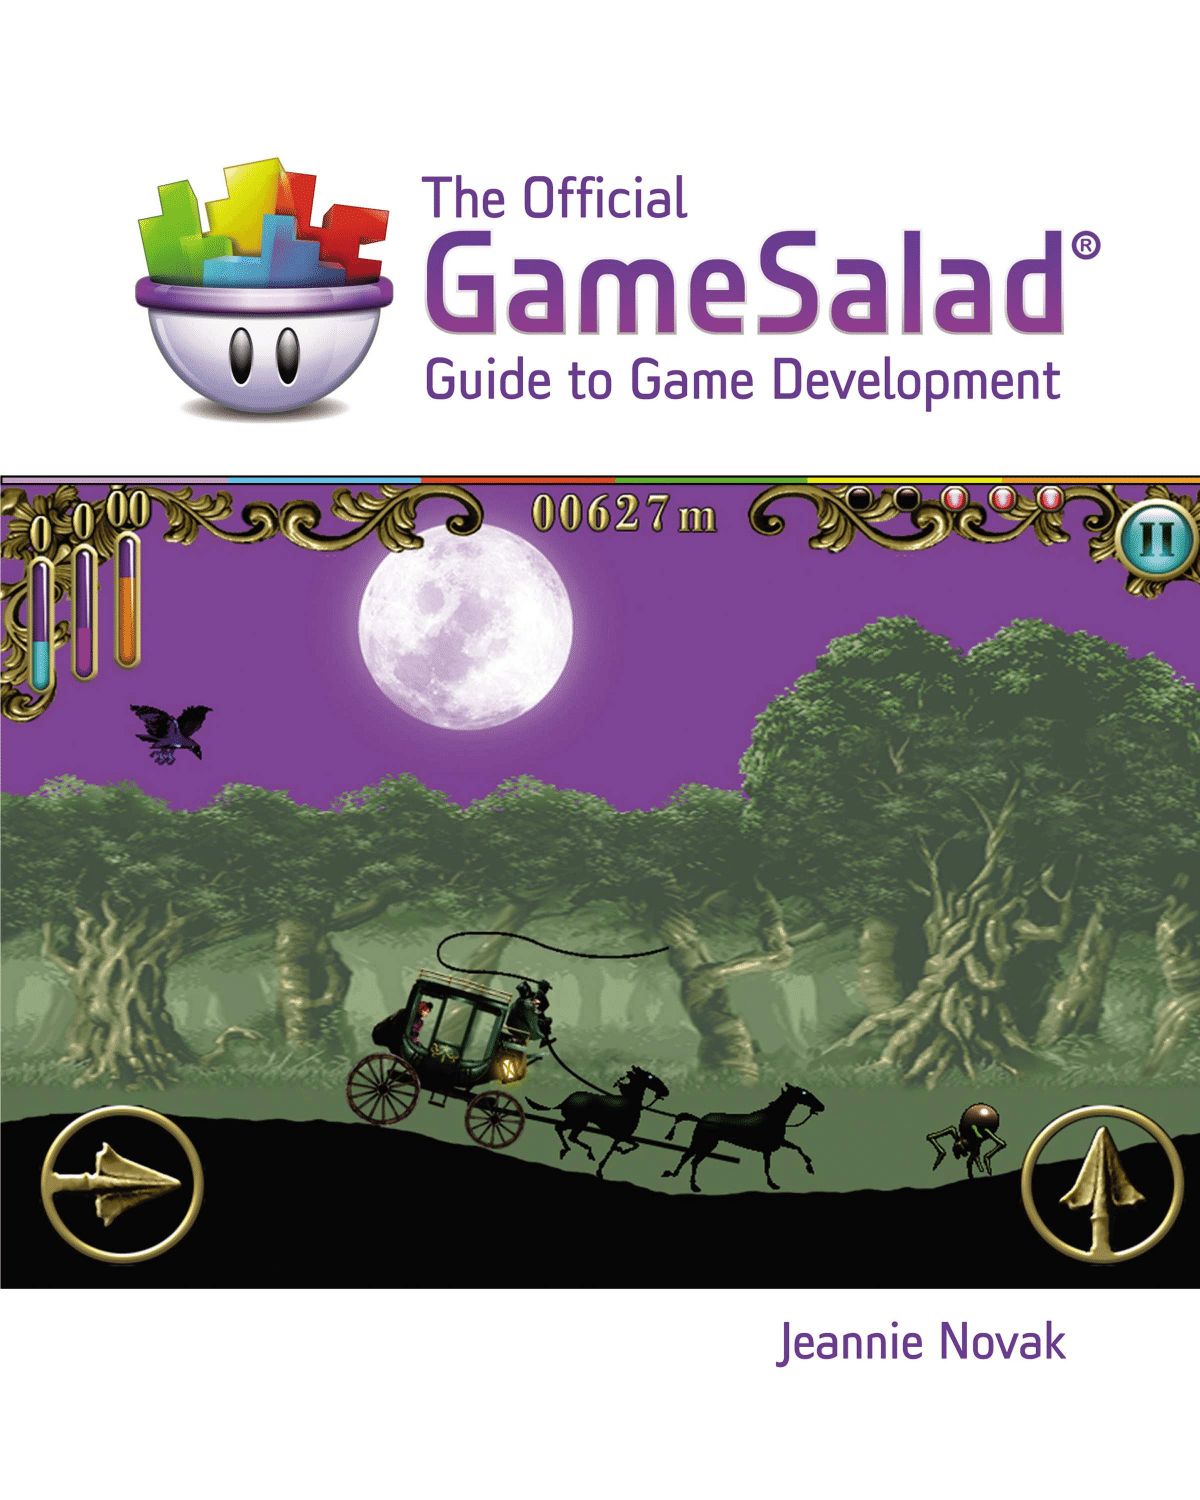 The Official GameSalad Guide to Game Development